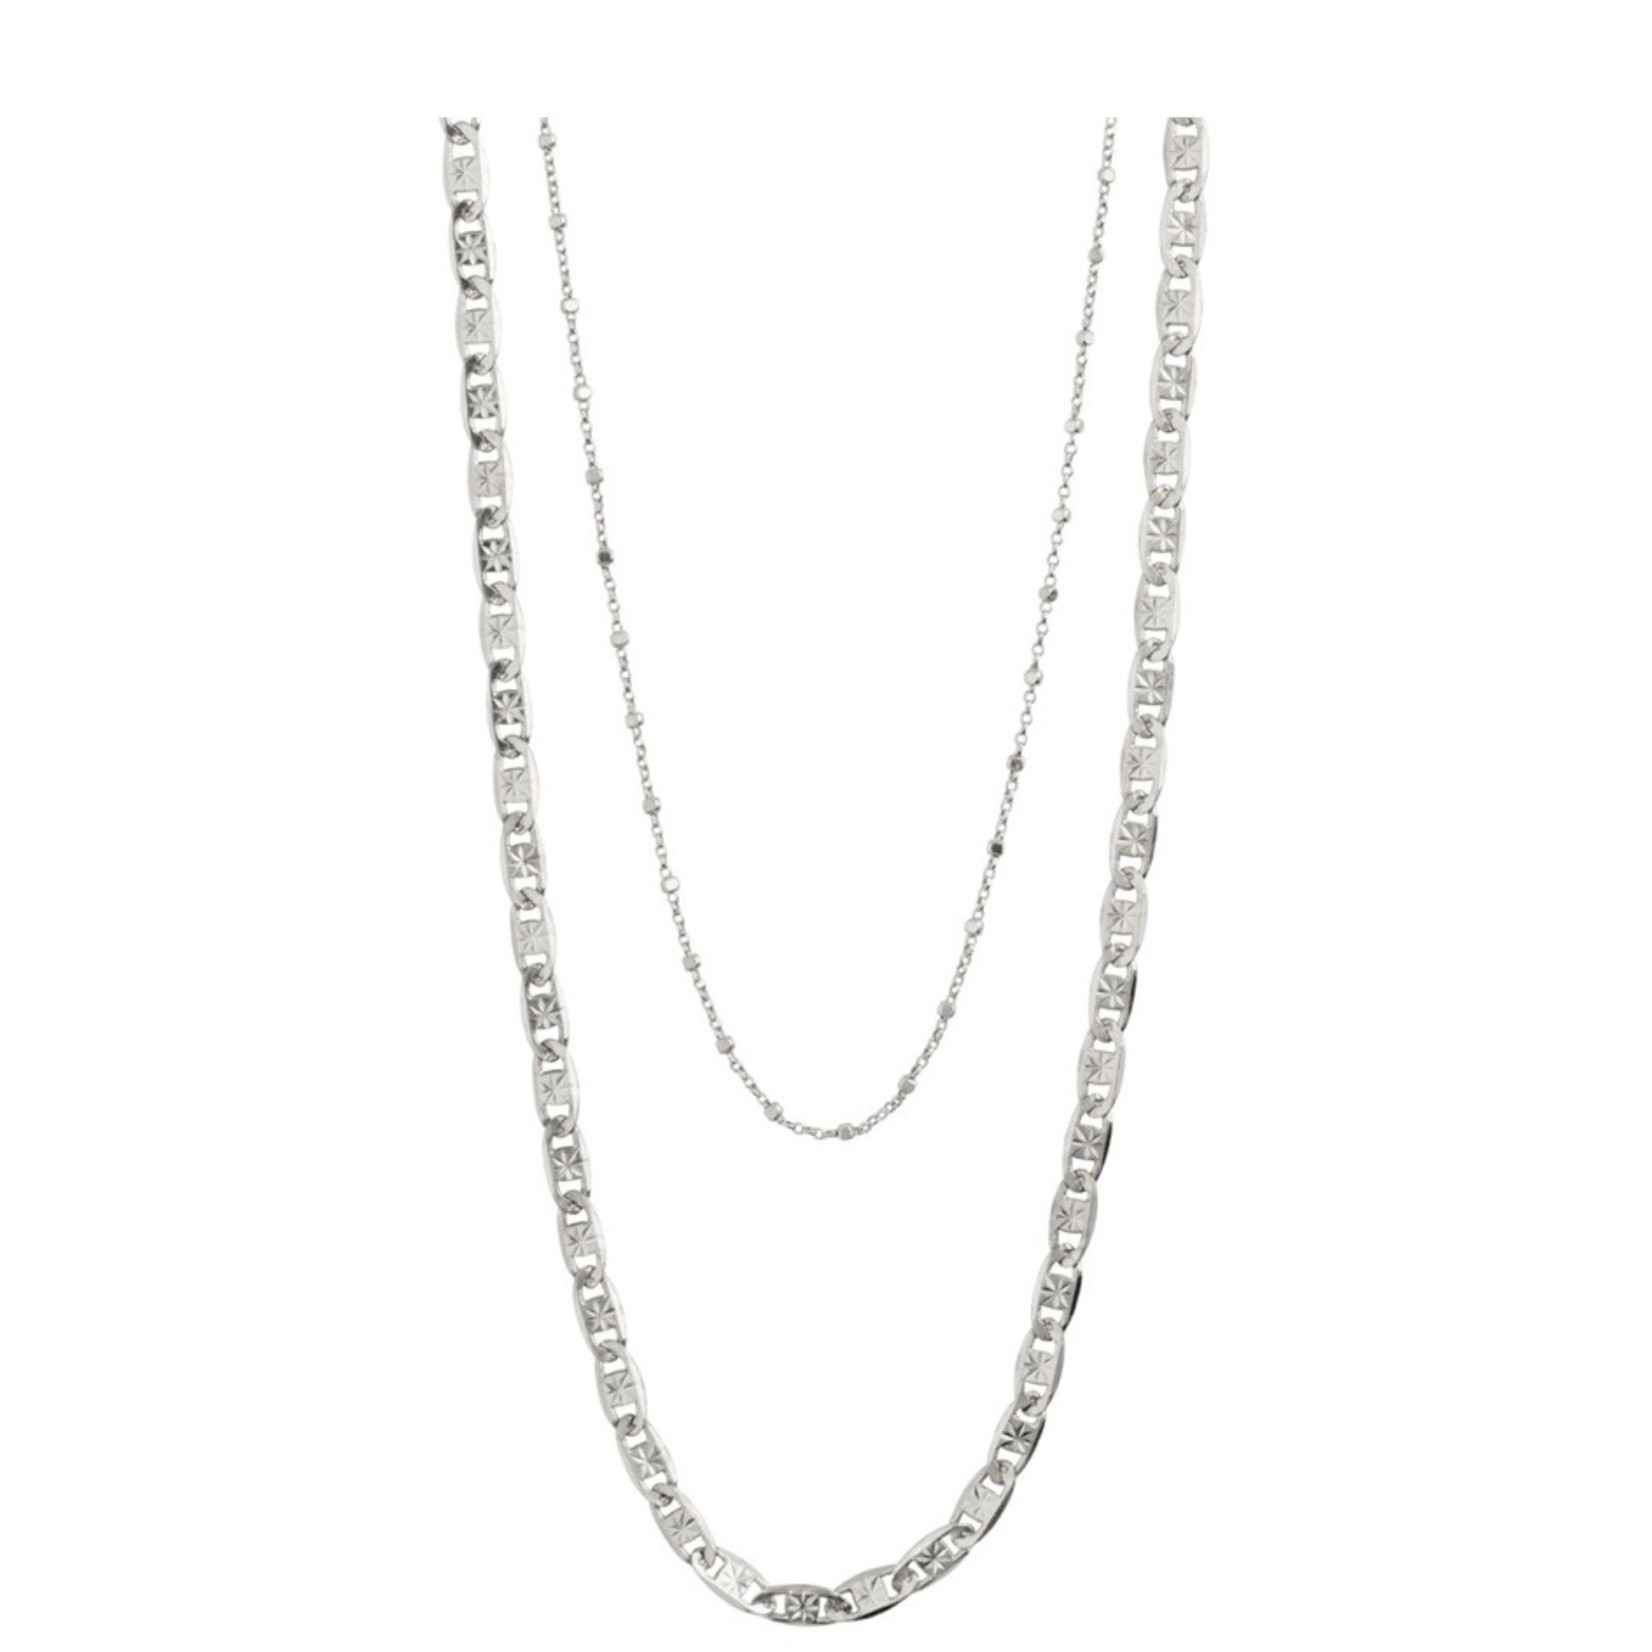 Pilgrim Pilgrim, Necklace Intuition, 2 Separate Chains, silver Plated